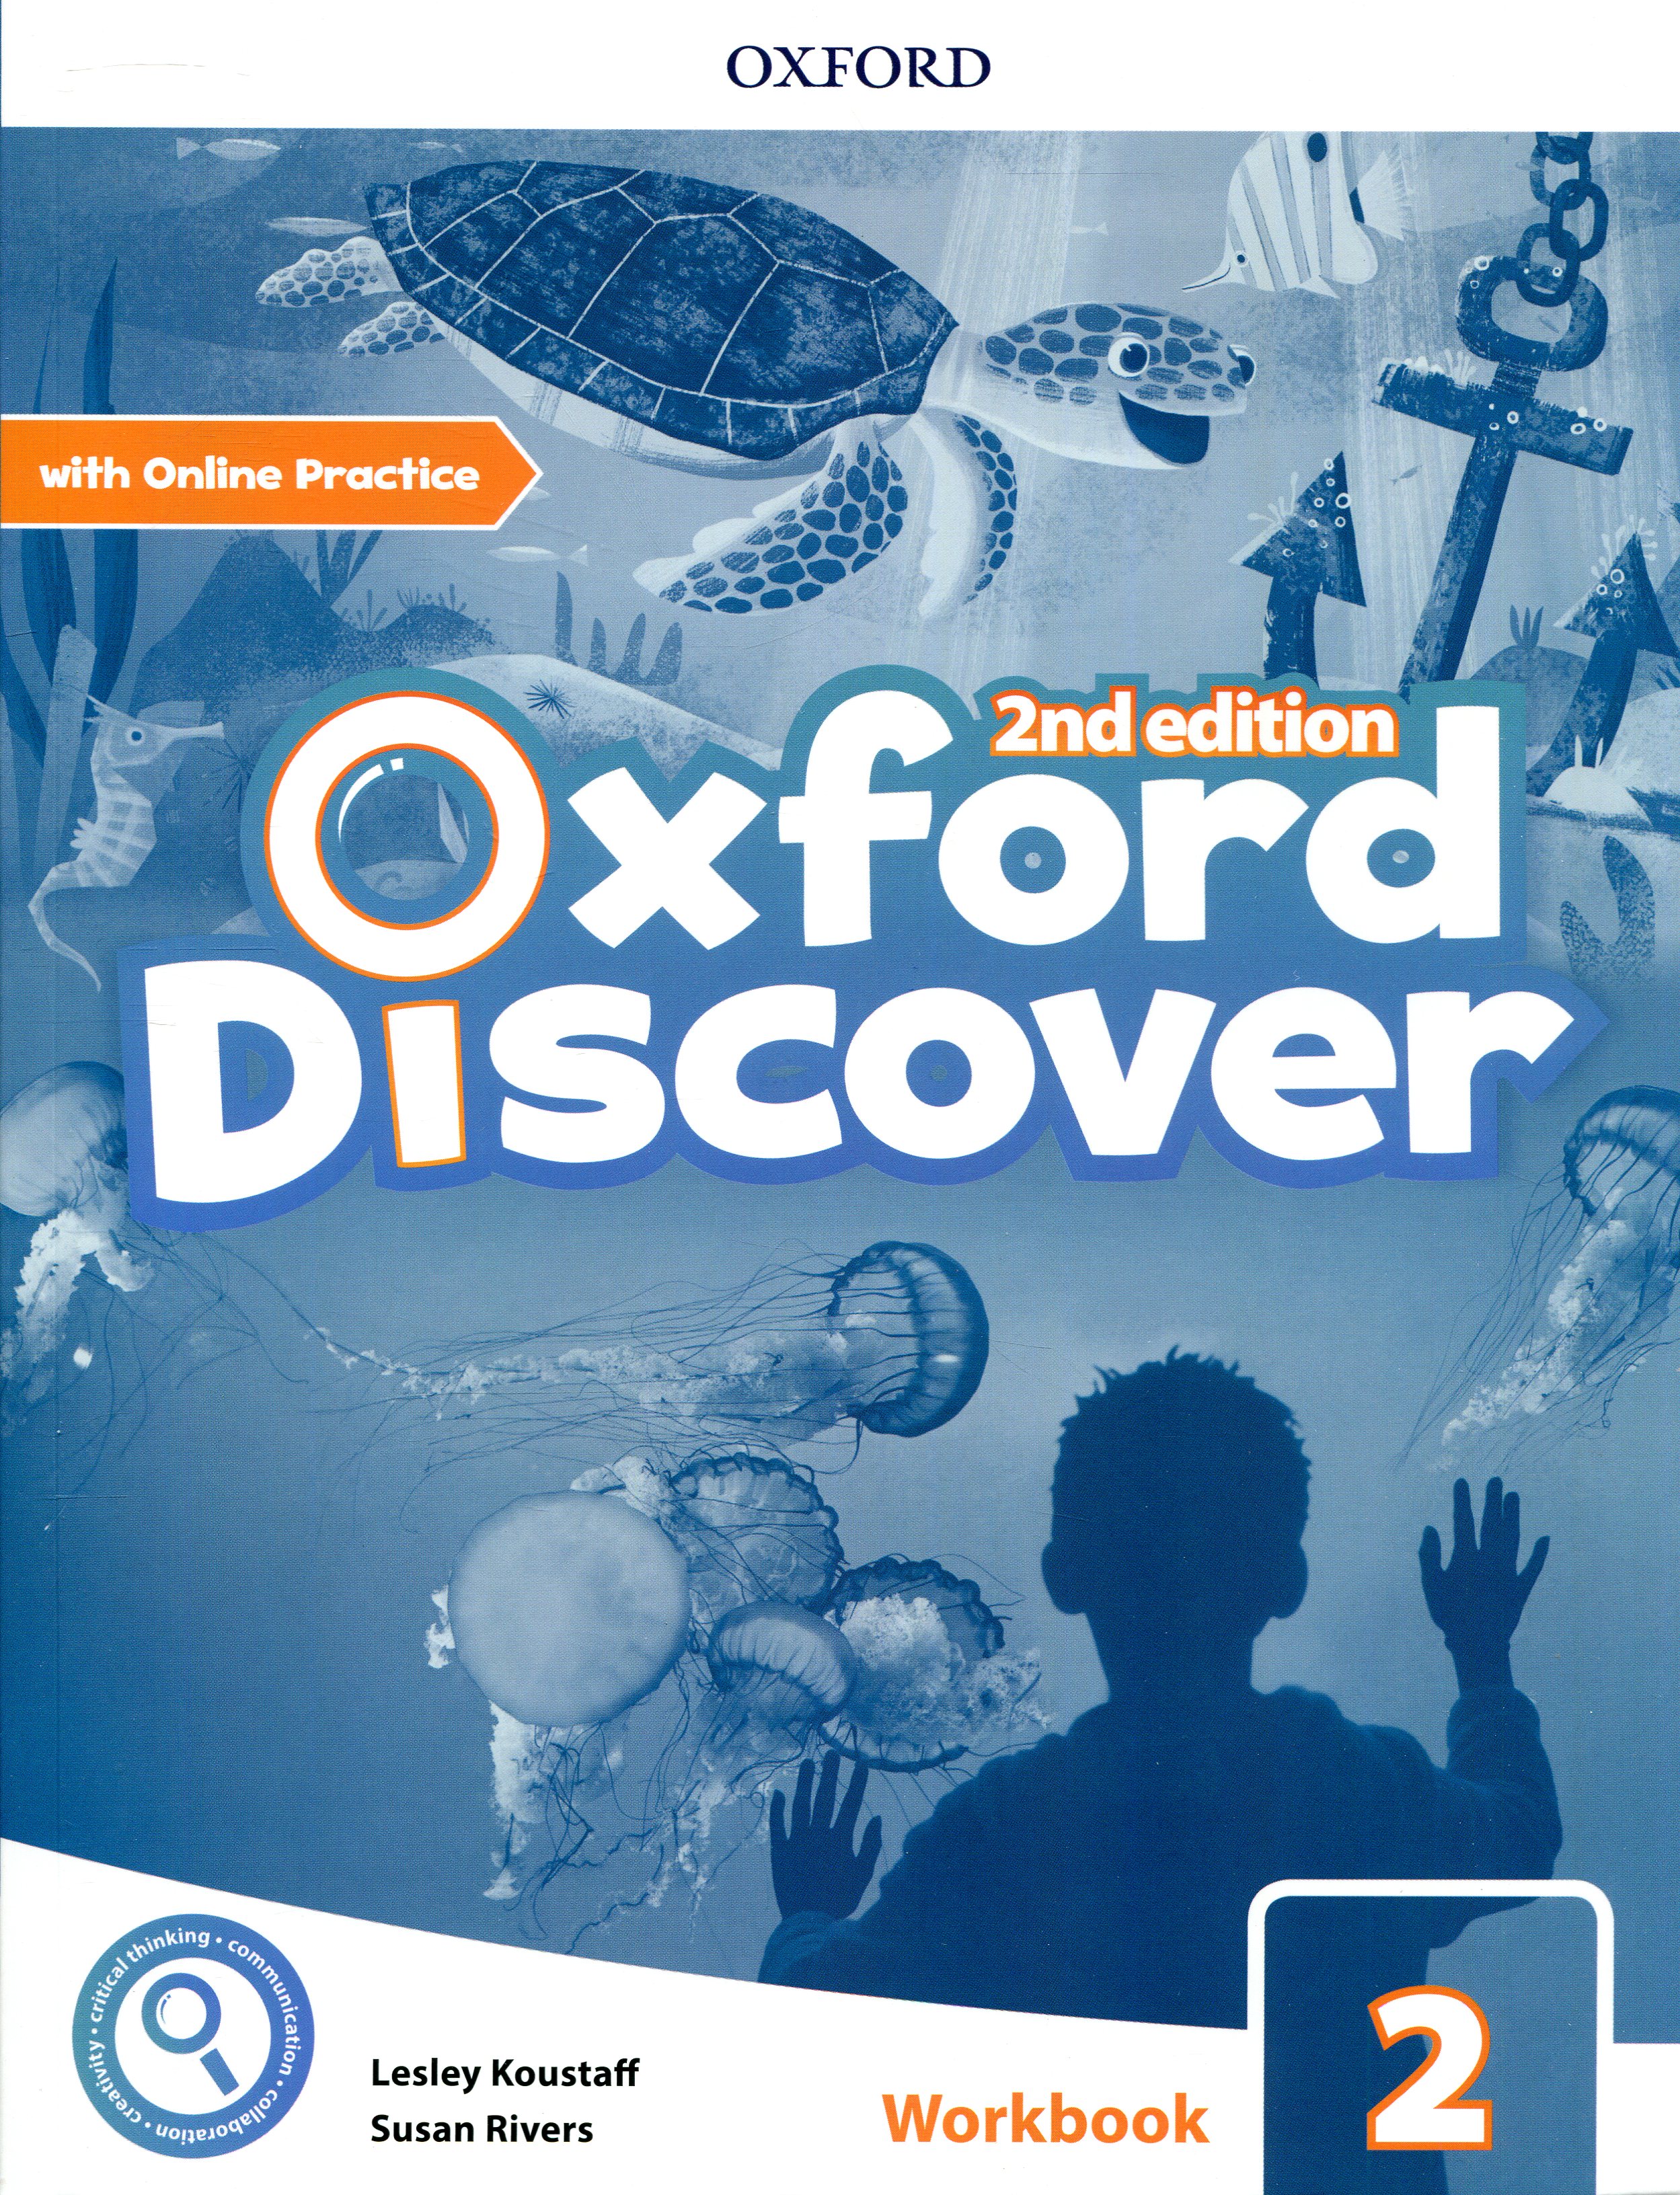 Oxford discover book. Oxford discover 2 Edition 2. Oxford discover 1 student's book 2nd Edition. Oxford discover 1 student book 2nd Edition Audio. Oxford discover 3 2nd Edition.